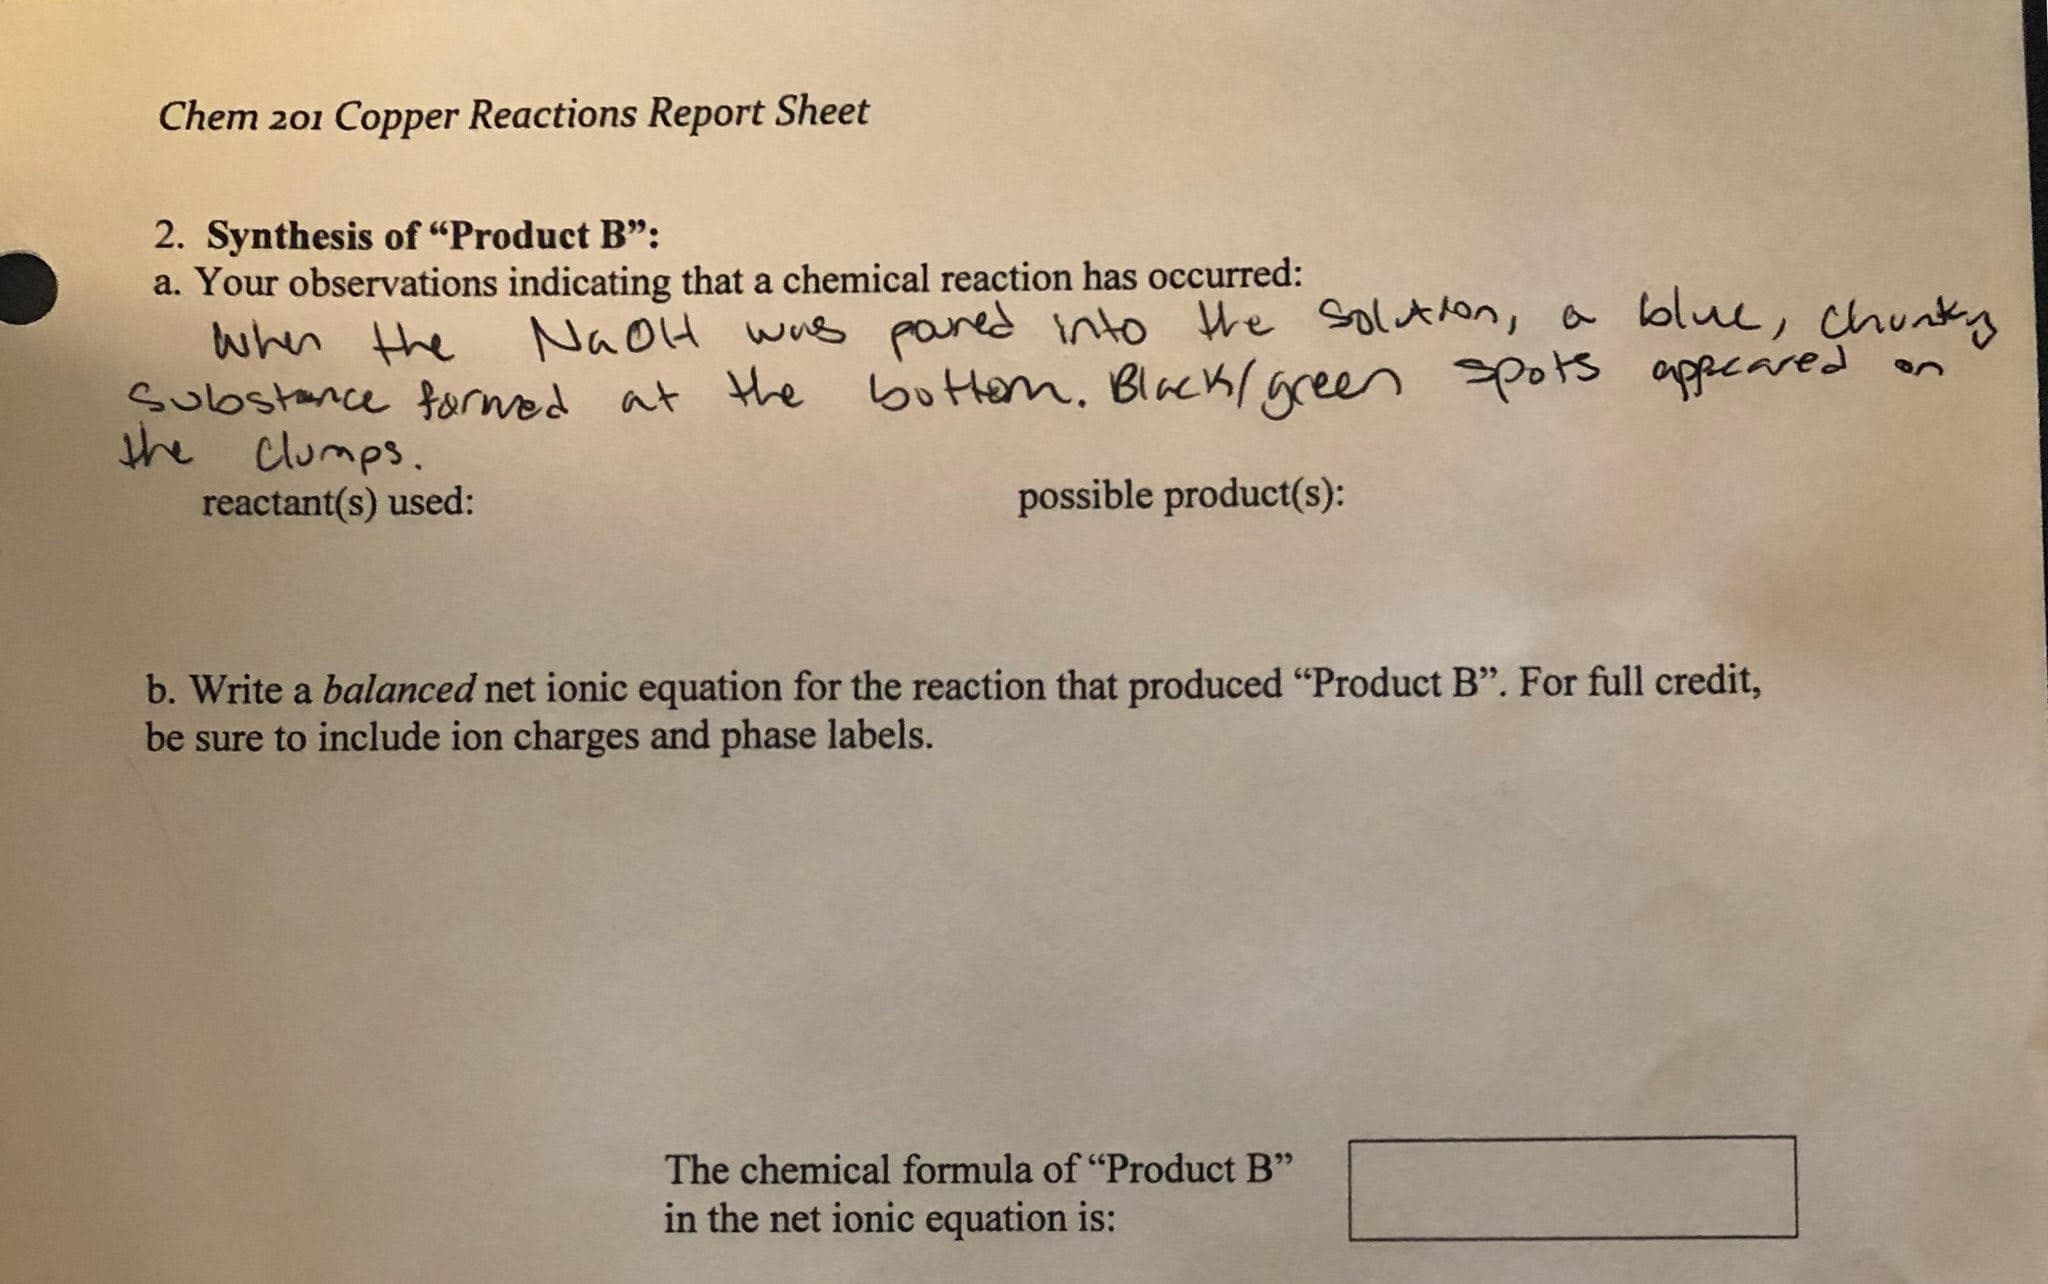 Chem 201 Copper Reactions Report Sheet
2. Synthesis of "Product B":
a. Your observations indicating that a chemical reaction has occurred:
lolu, chunky
wus pared nto We Solt tan
the Naou
oppeared
sHem. Bchgreen pors apperes
Sulostance ormed at e
he clumps.
possible product(s):
reactant(s) used:
b. Write a balanced net ionic equation for the reaction that produced "Product B". For full credit,
be sure to include ion charges and phase labels.
The chemical formula of "Product B"
in the net ionic equation is:
